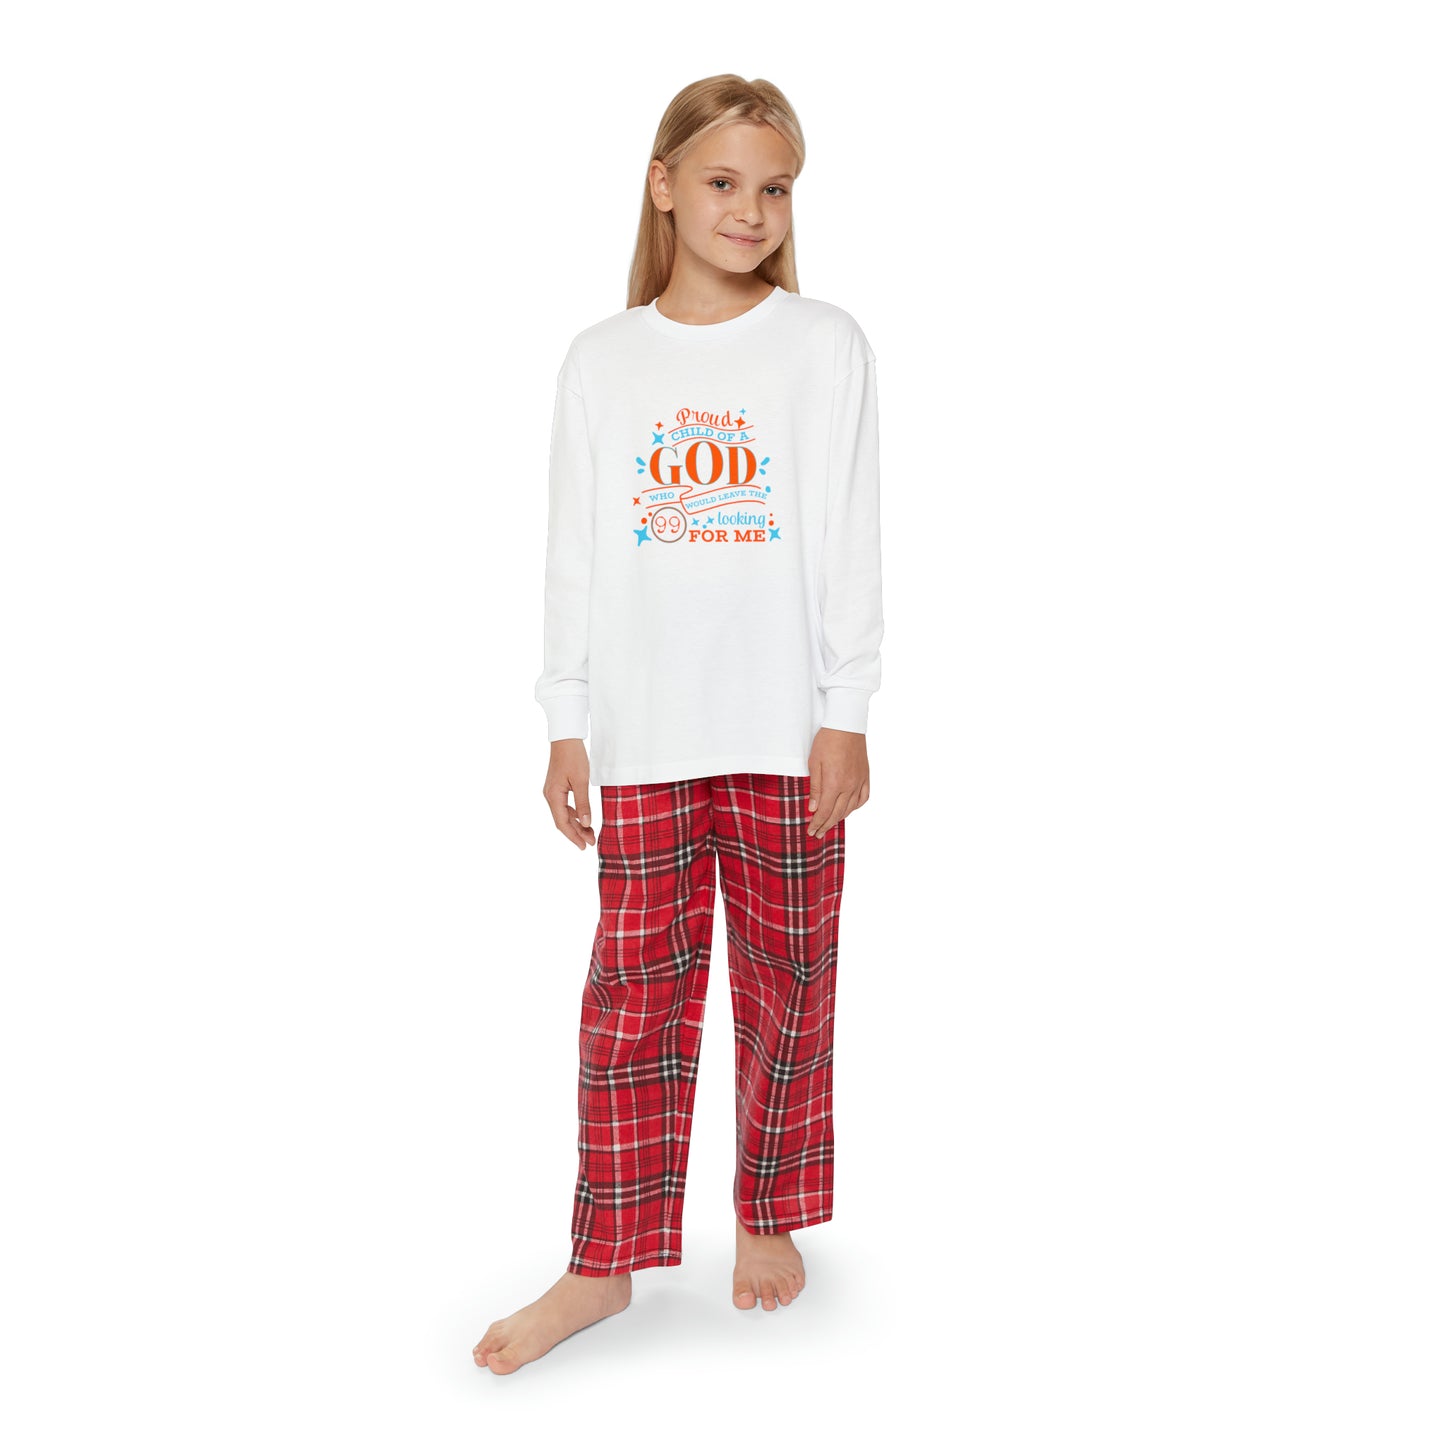 Proud Child Of A God Who Would Leave The 99 Looking For Me Youth Christian Long Sleeve Pajama Set Printify